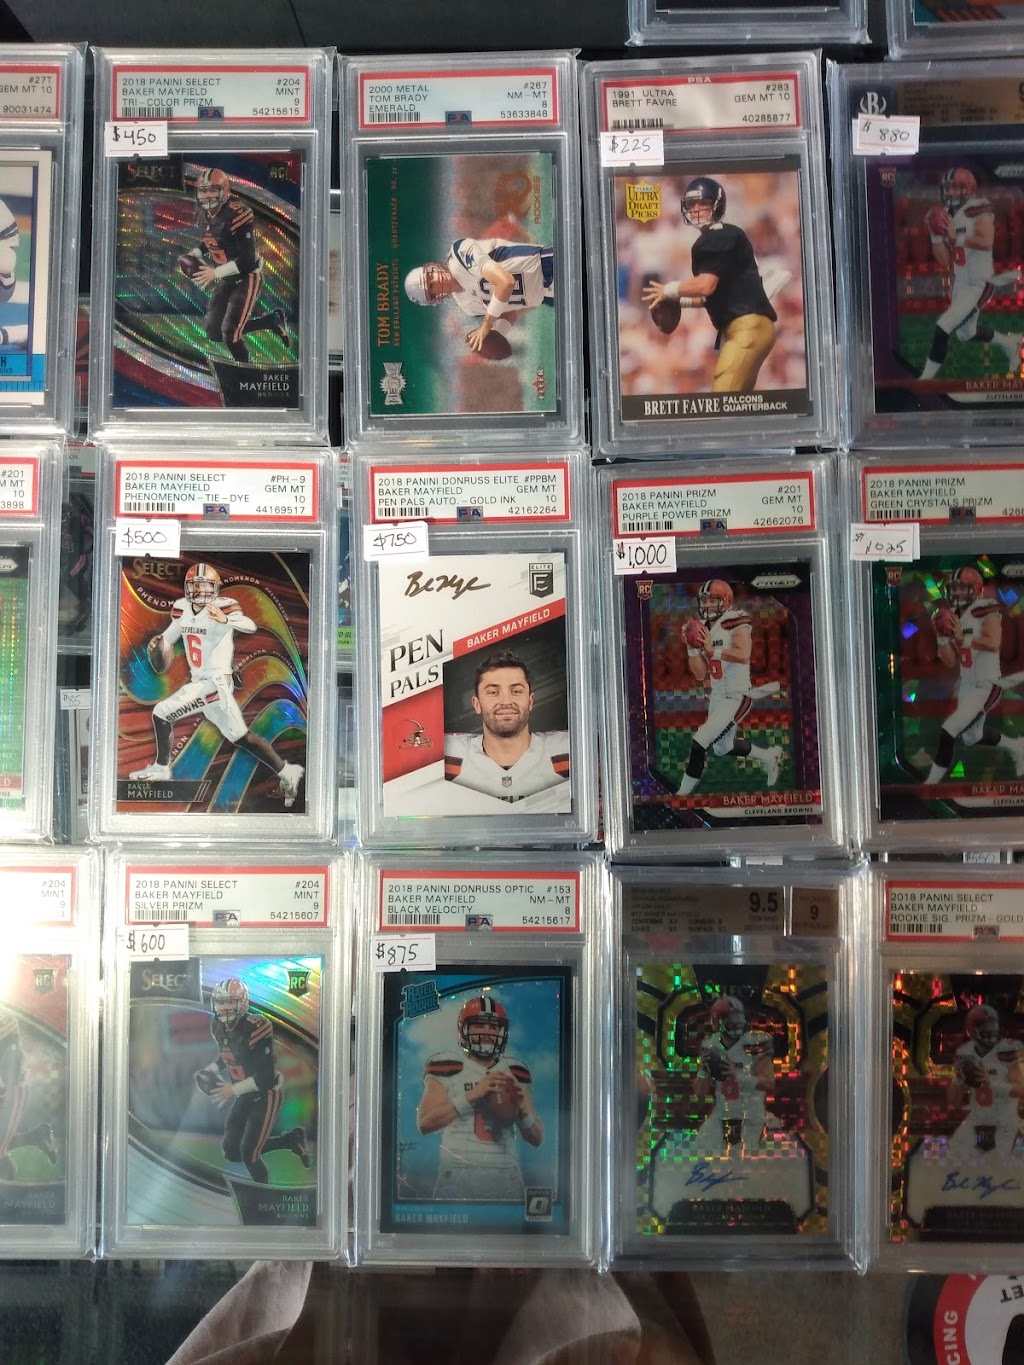 1of1 Sports Cards & Memorabilia | 13221 Prospect Rd, Strongsville, OH 44149 | Phone: (440) 638-4044